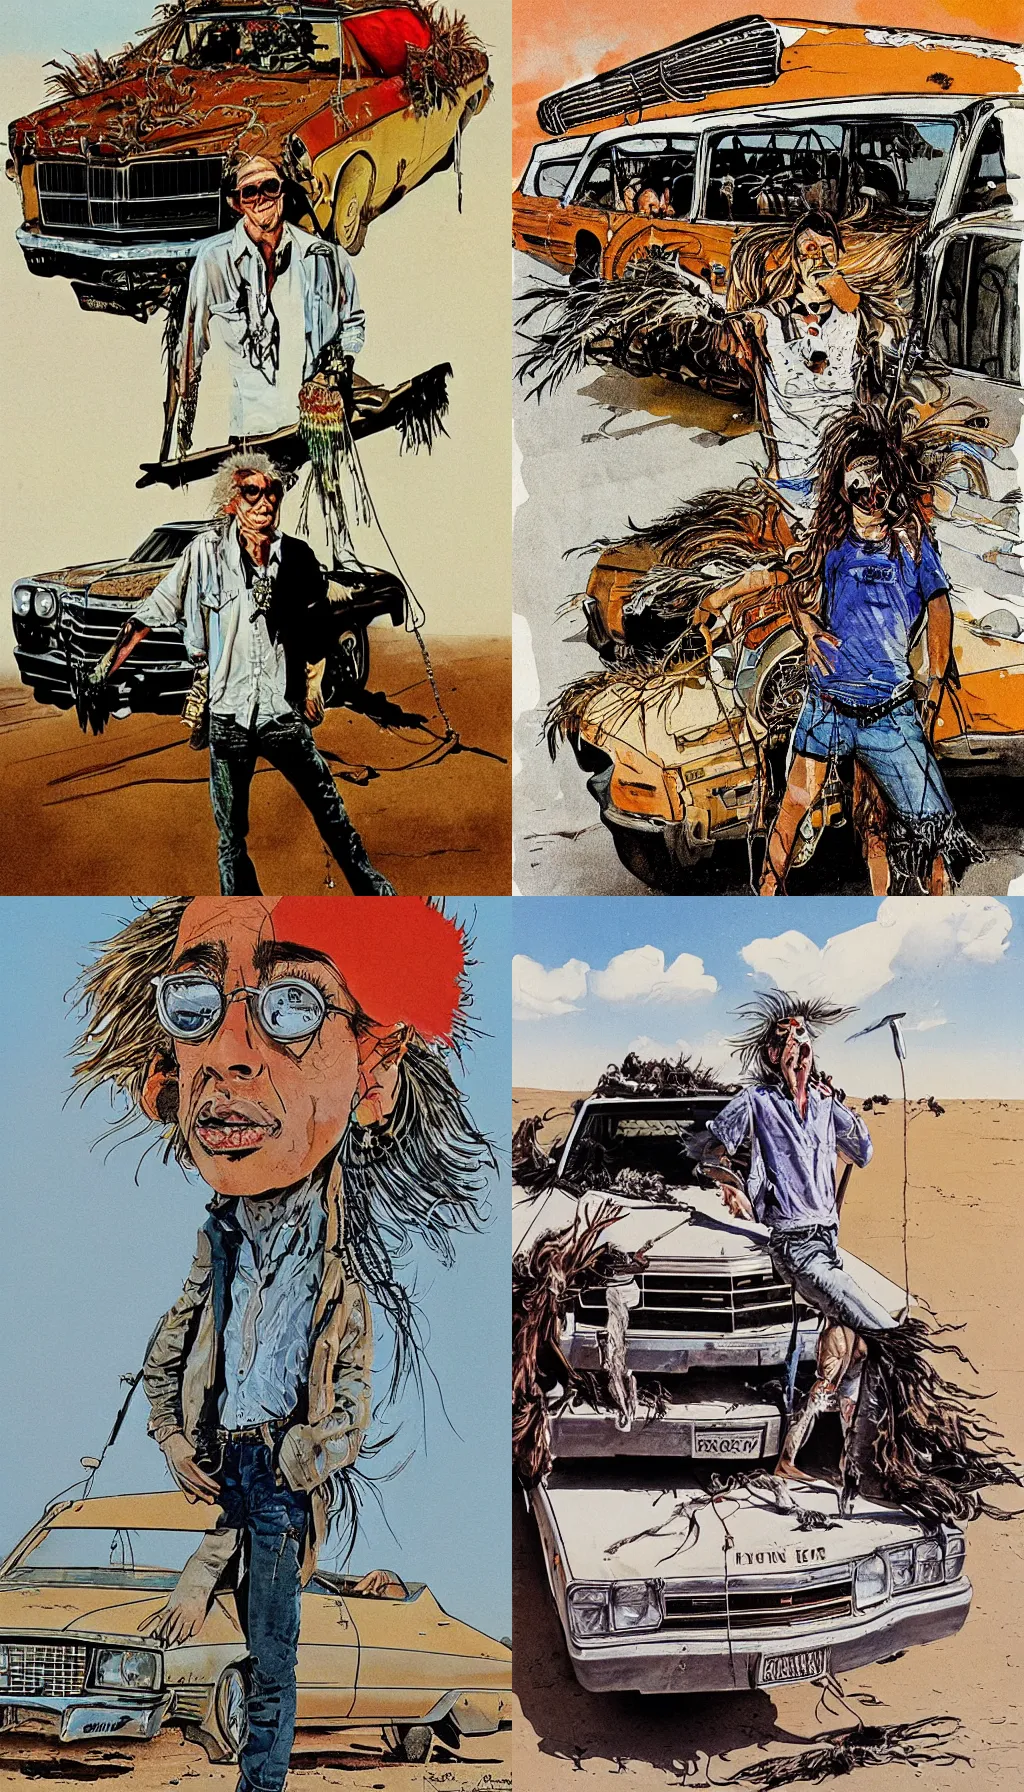 Prompt: ralph steadman illustration of a young man with a feathered mullet and a dangle earring, standing in front of an old el camino car, desert landscape, panting, film grain, surreal